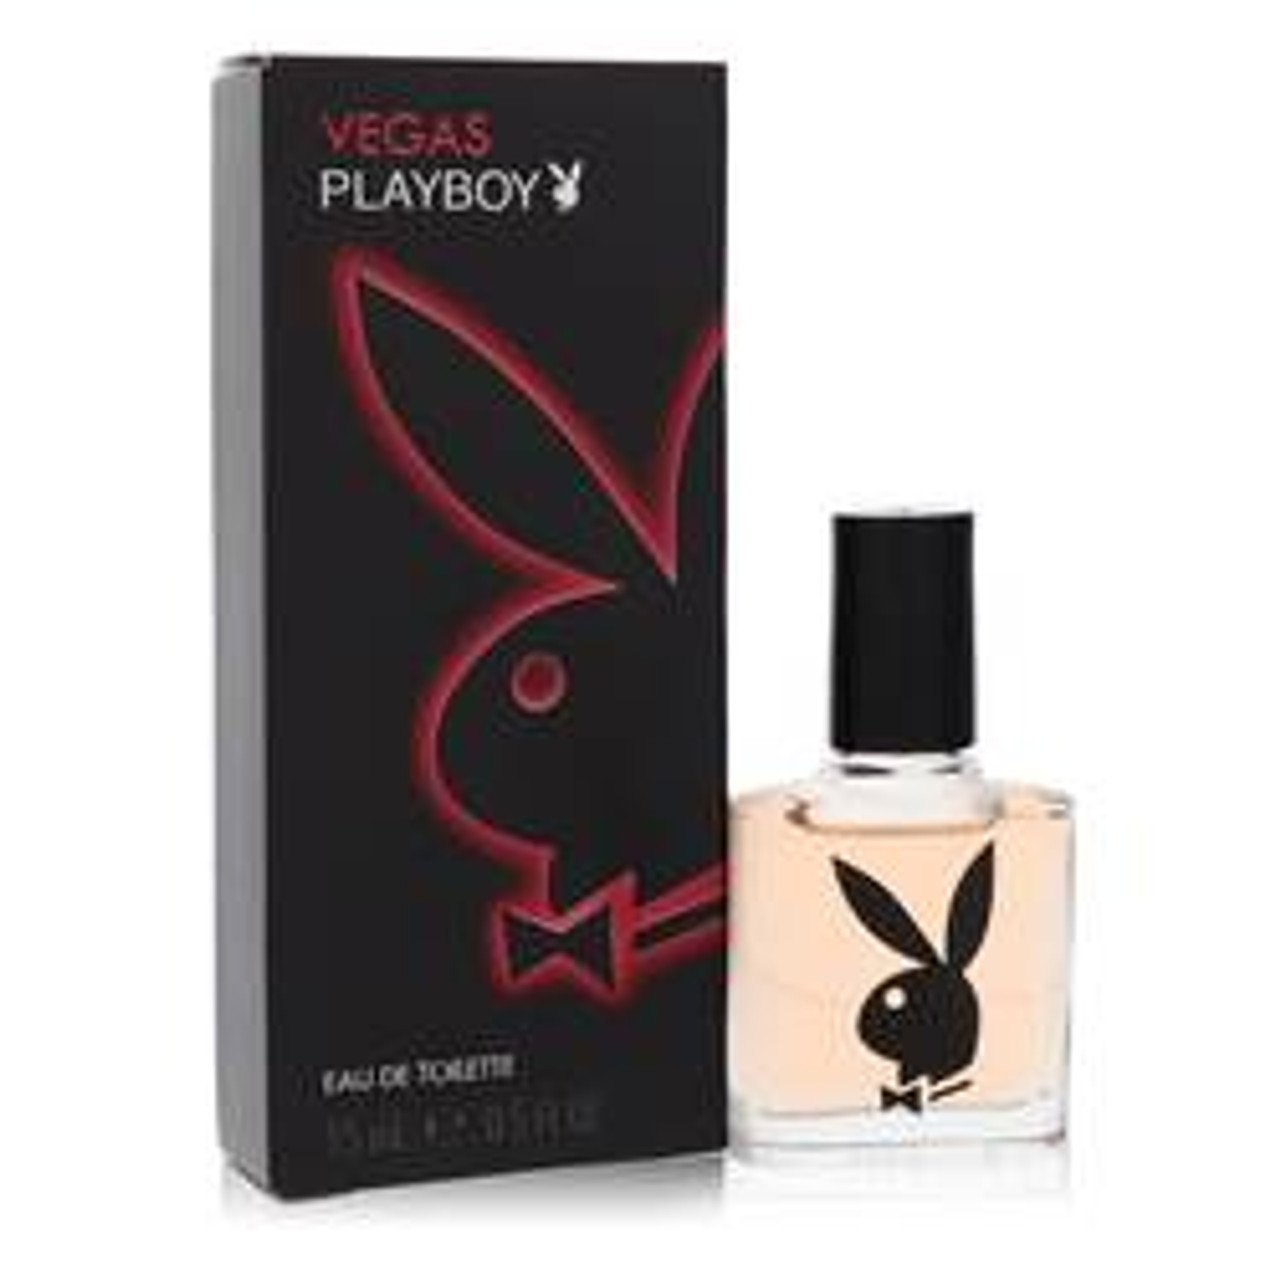 Vegas Playboy Cologne By Playboy Mini EDT 0.5 oz for Men - [From 44.00 - Choose pk Qty ] - *Ships from Miami